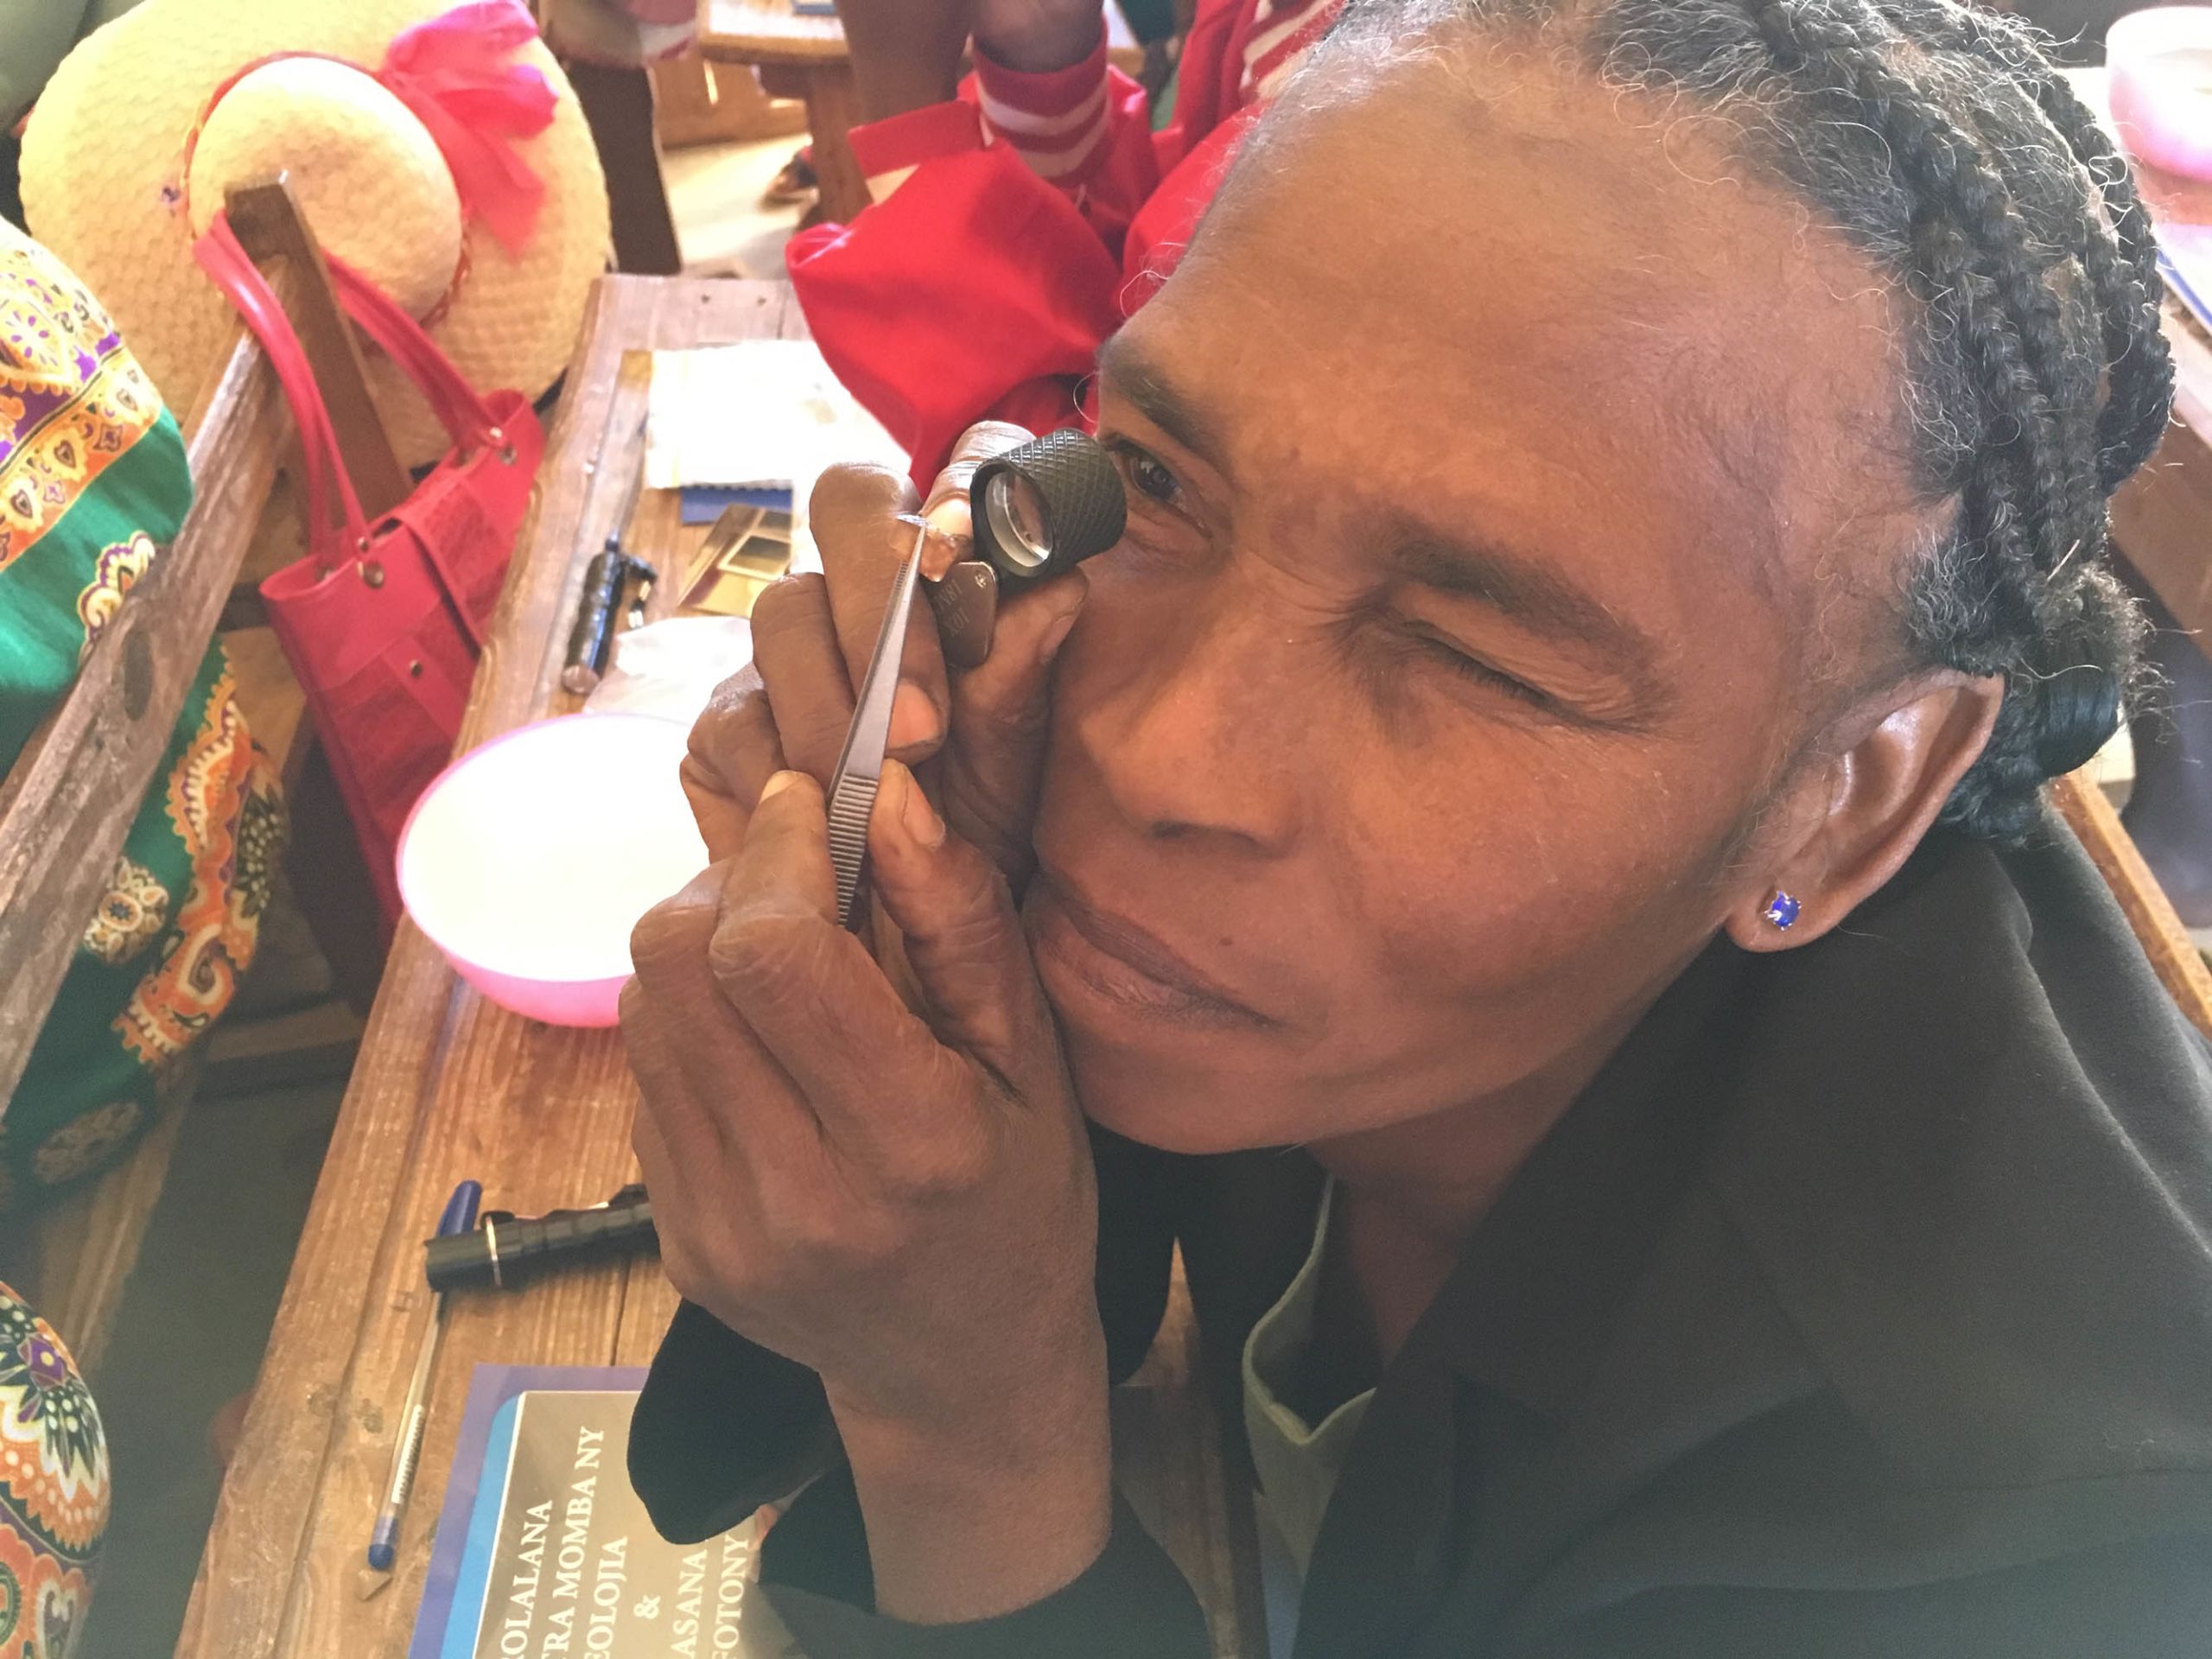 Malagasy sapphire miner learning to use loupe and tweezers to identify her stone